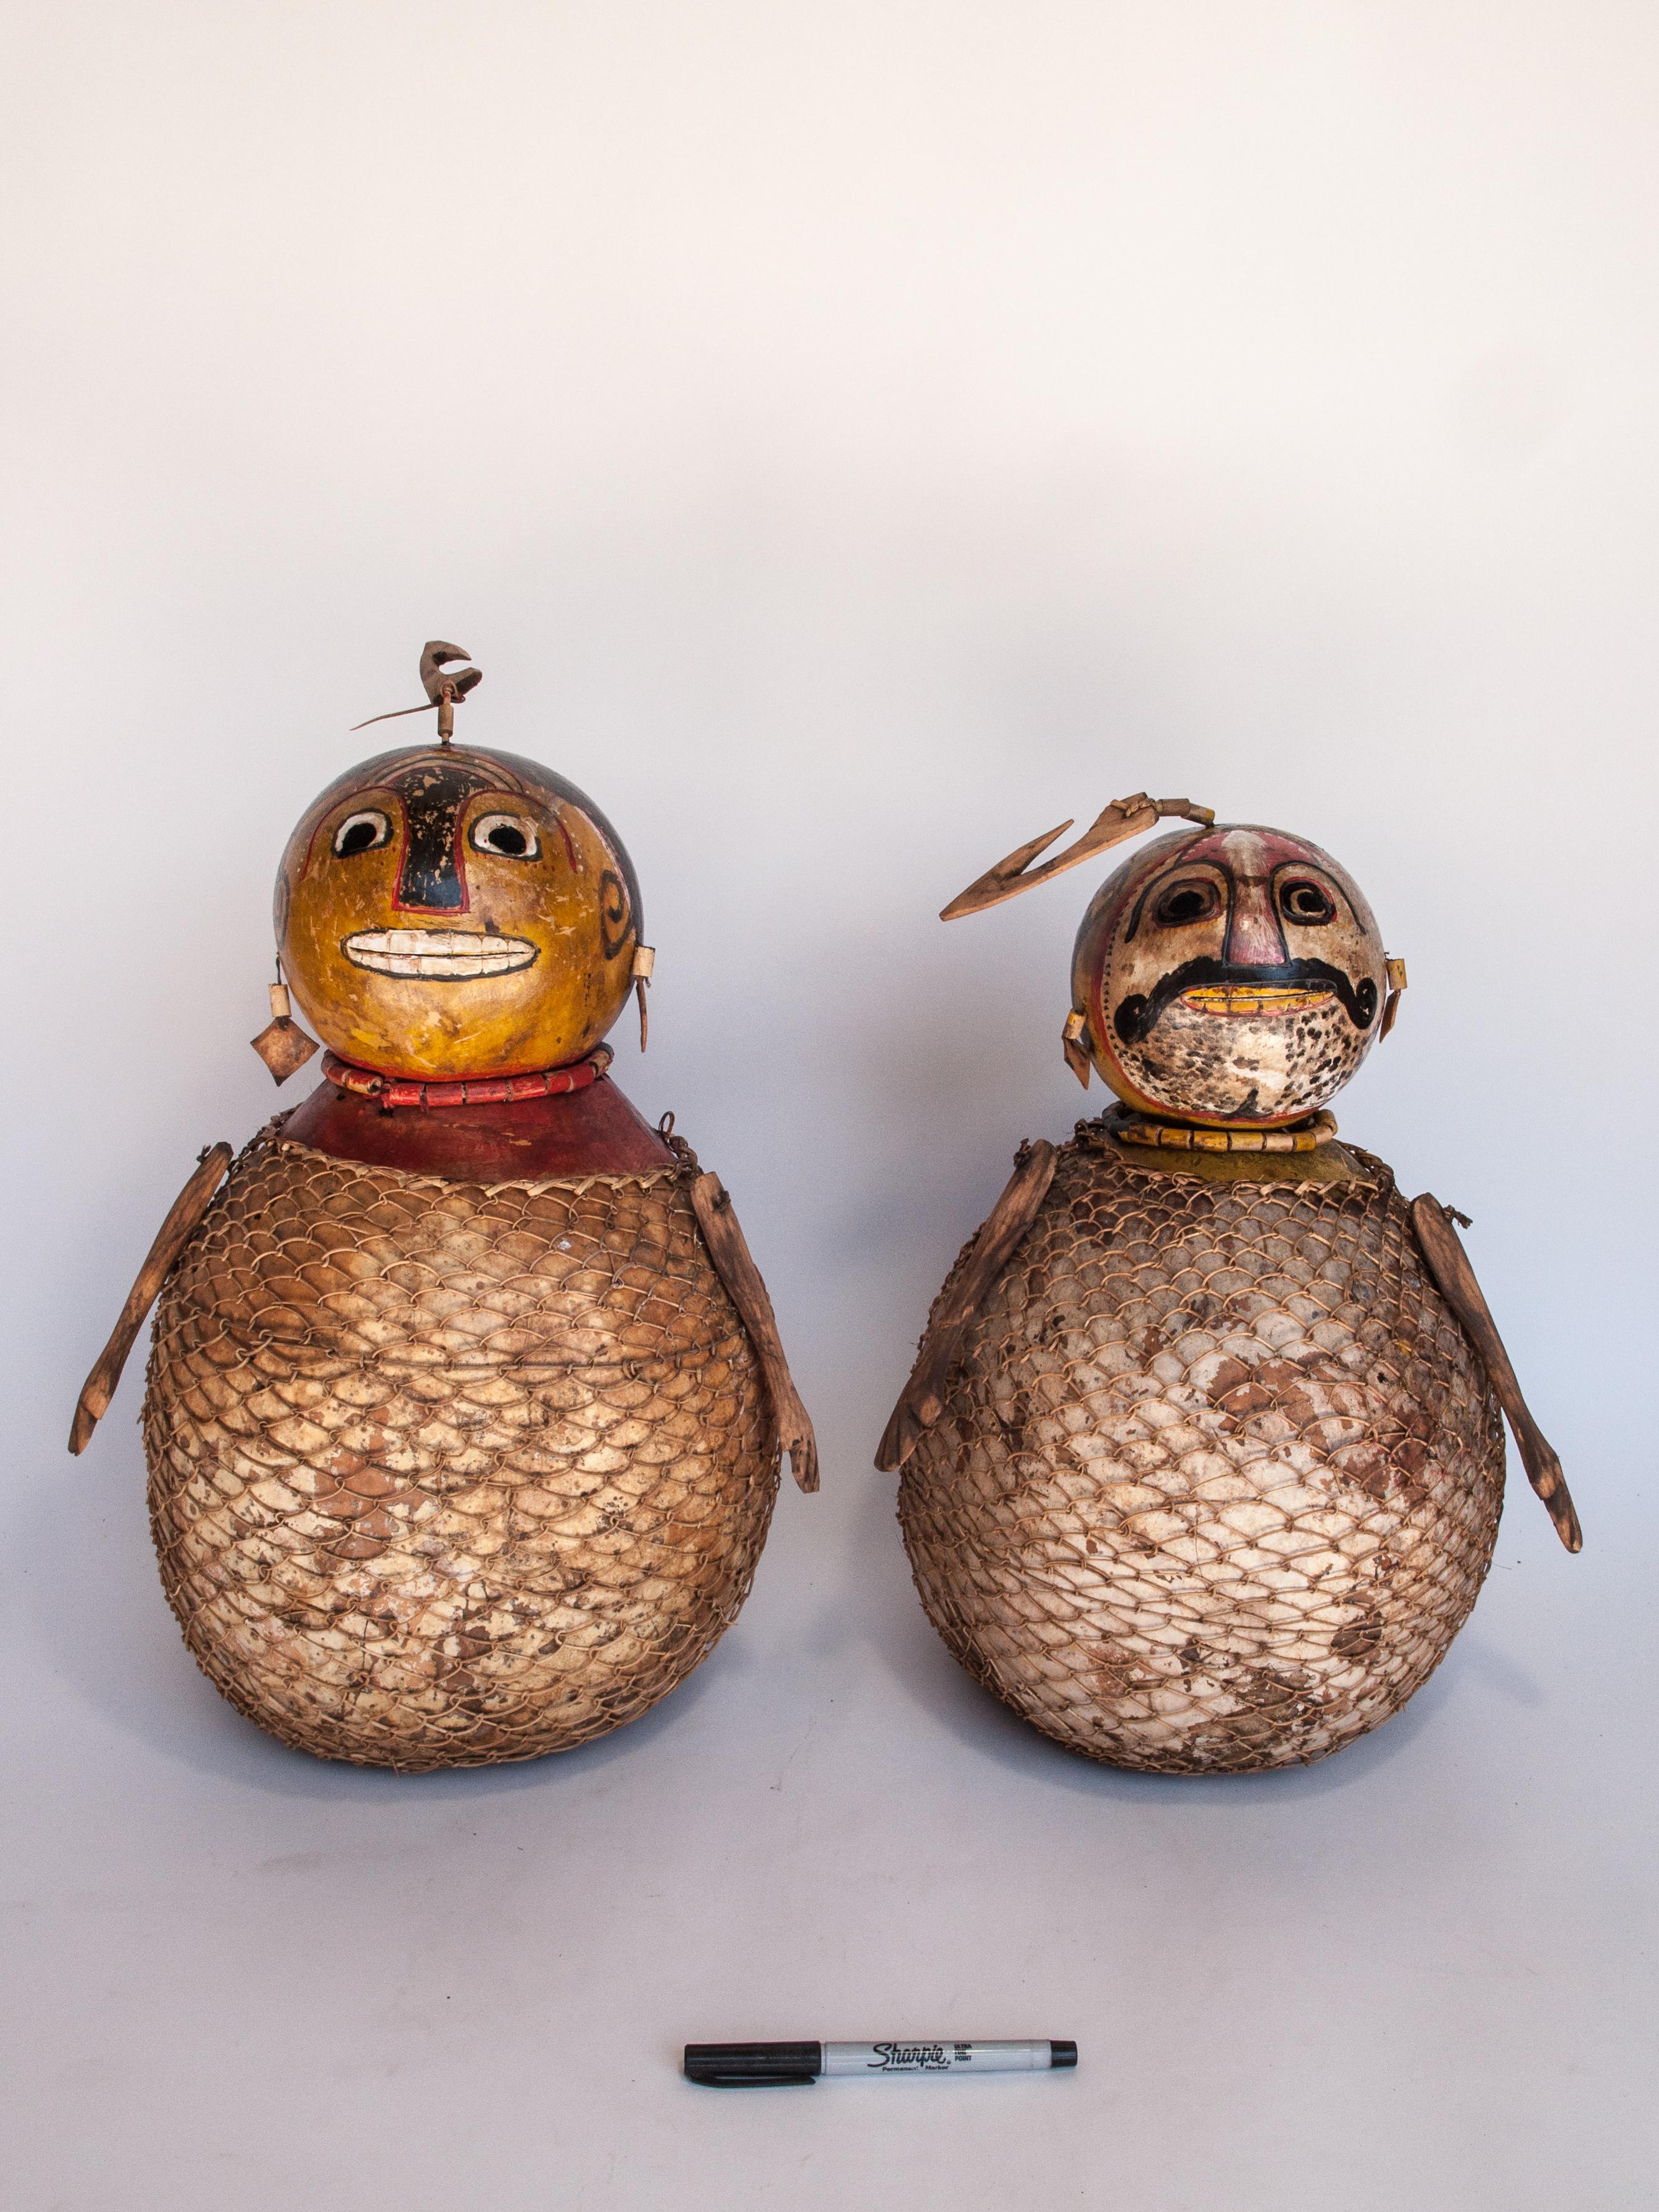 Vintage painted gourd couple. Folk Art from Lombok, Indonesia, late 20th century.
This delightful couple functioned as a kind of Lombok folk version of the Loro Blonyo Wedding Statues so important to Javanese culture. The female figure is Dewi Sri,